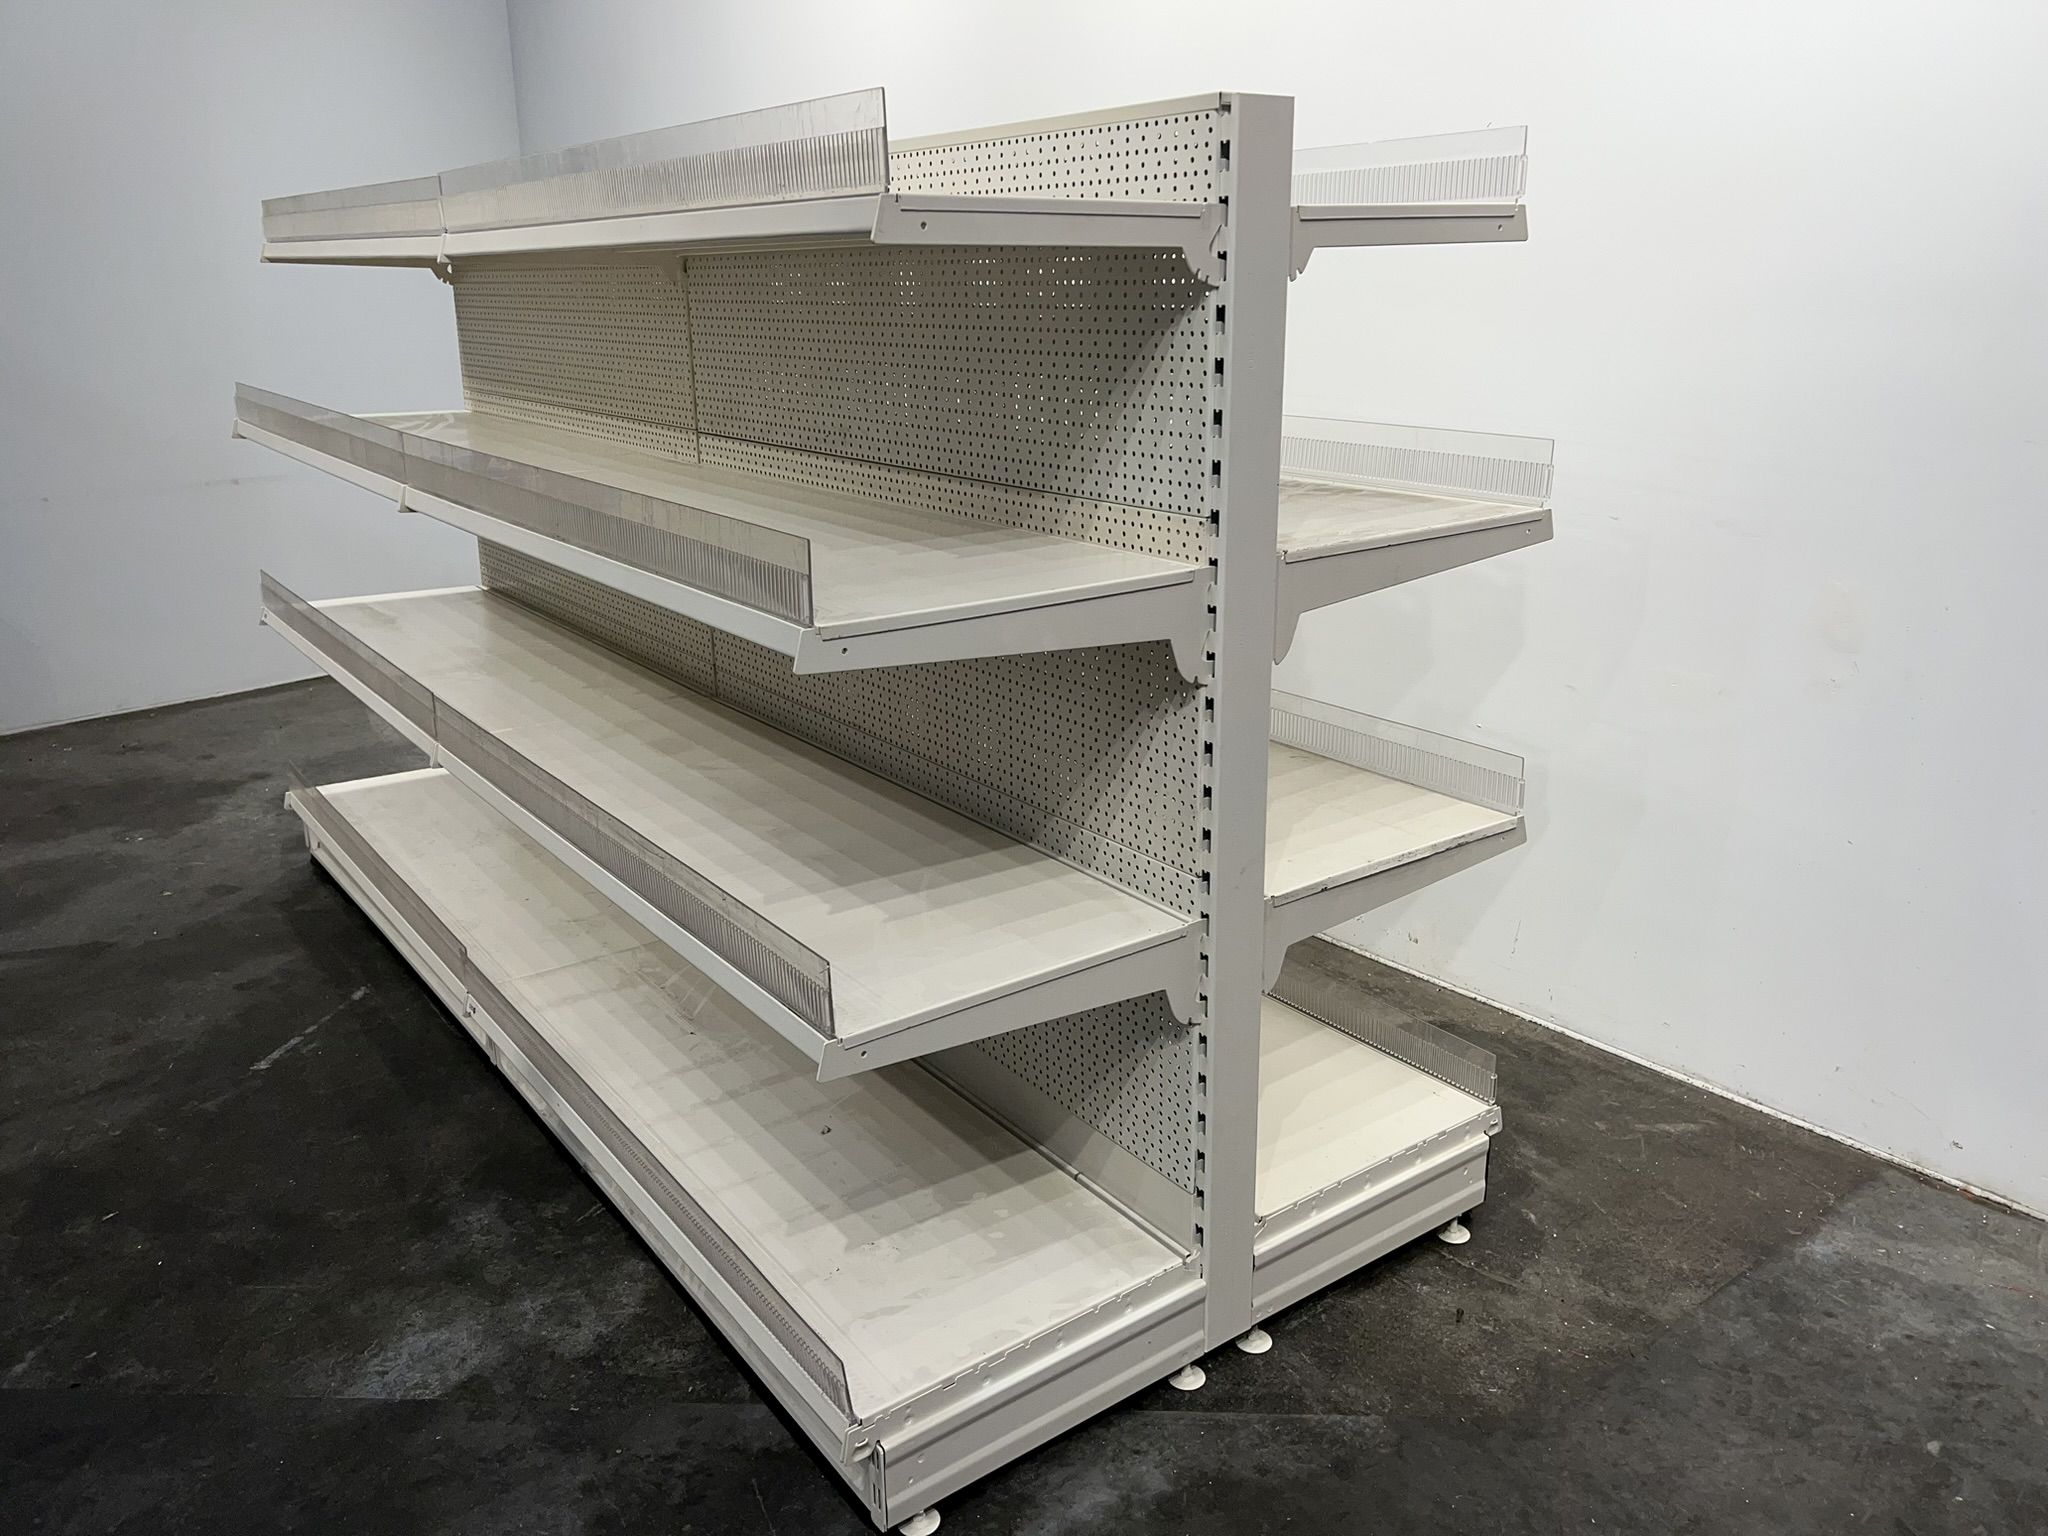 Shelving system / wholesale market  shelving / light heavy duty shelf, Tego, suitable for appropx. 625 m² of sales area